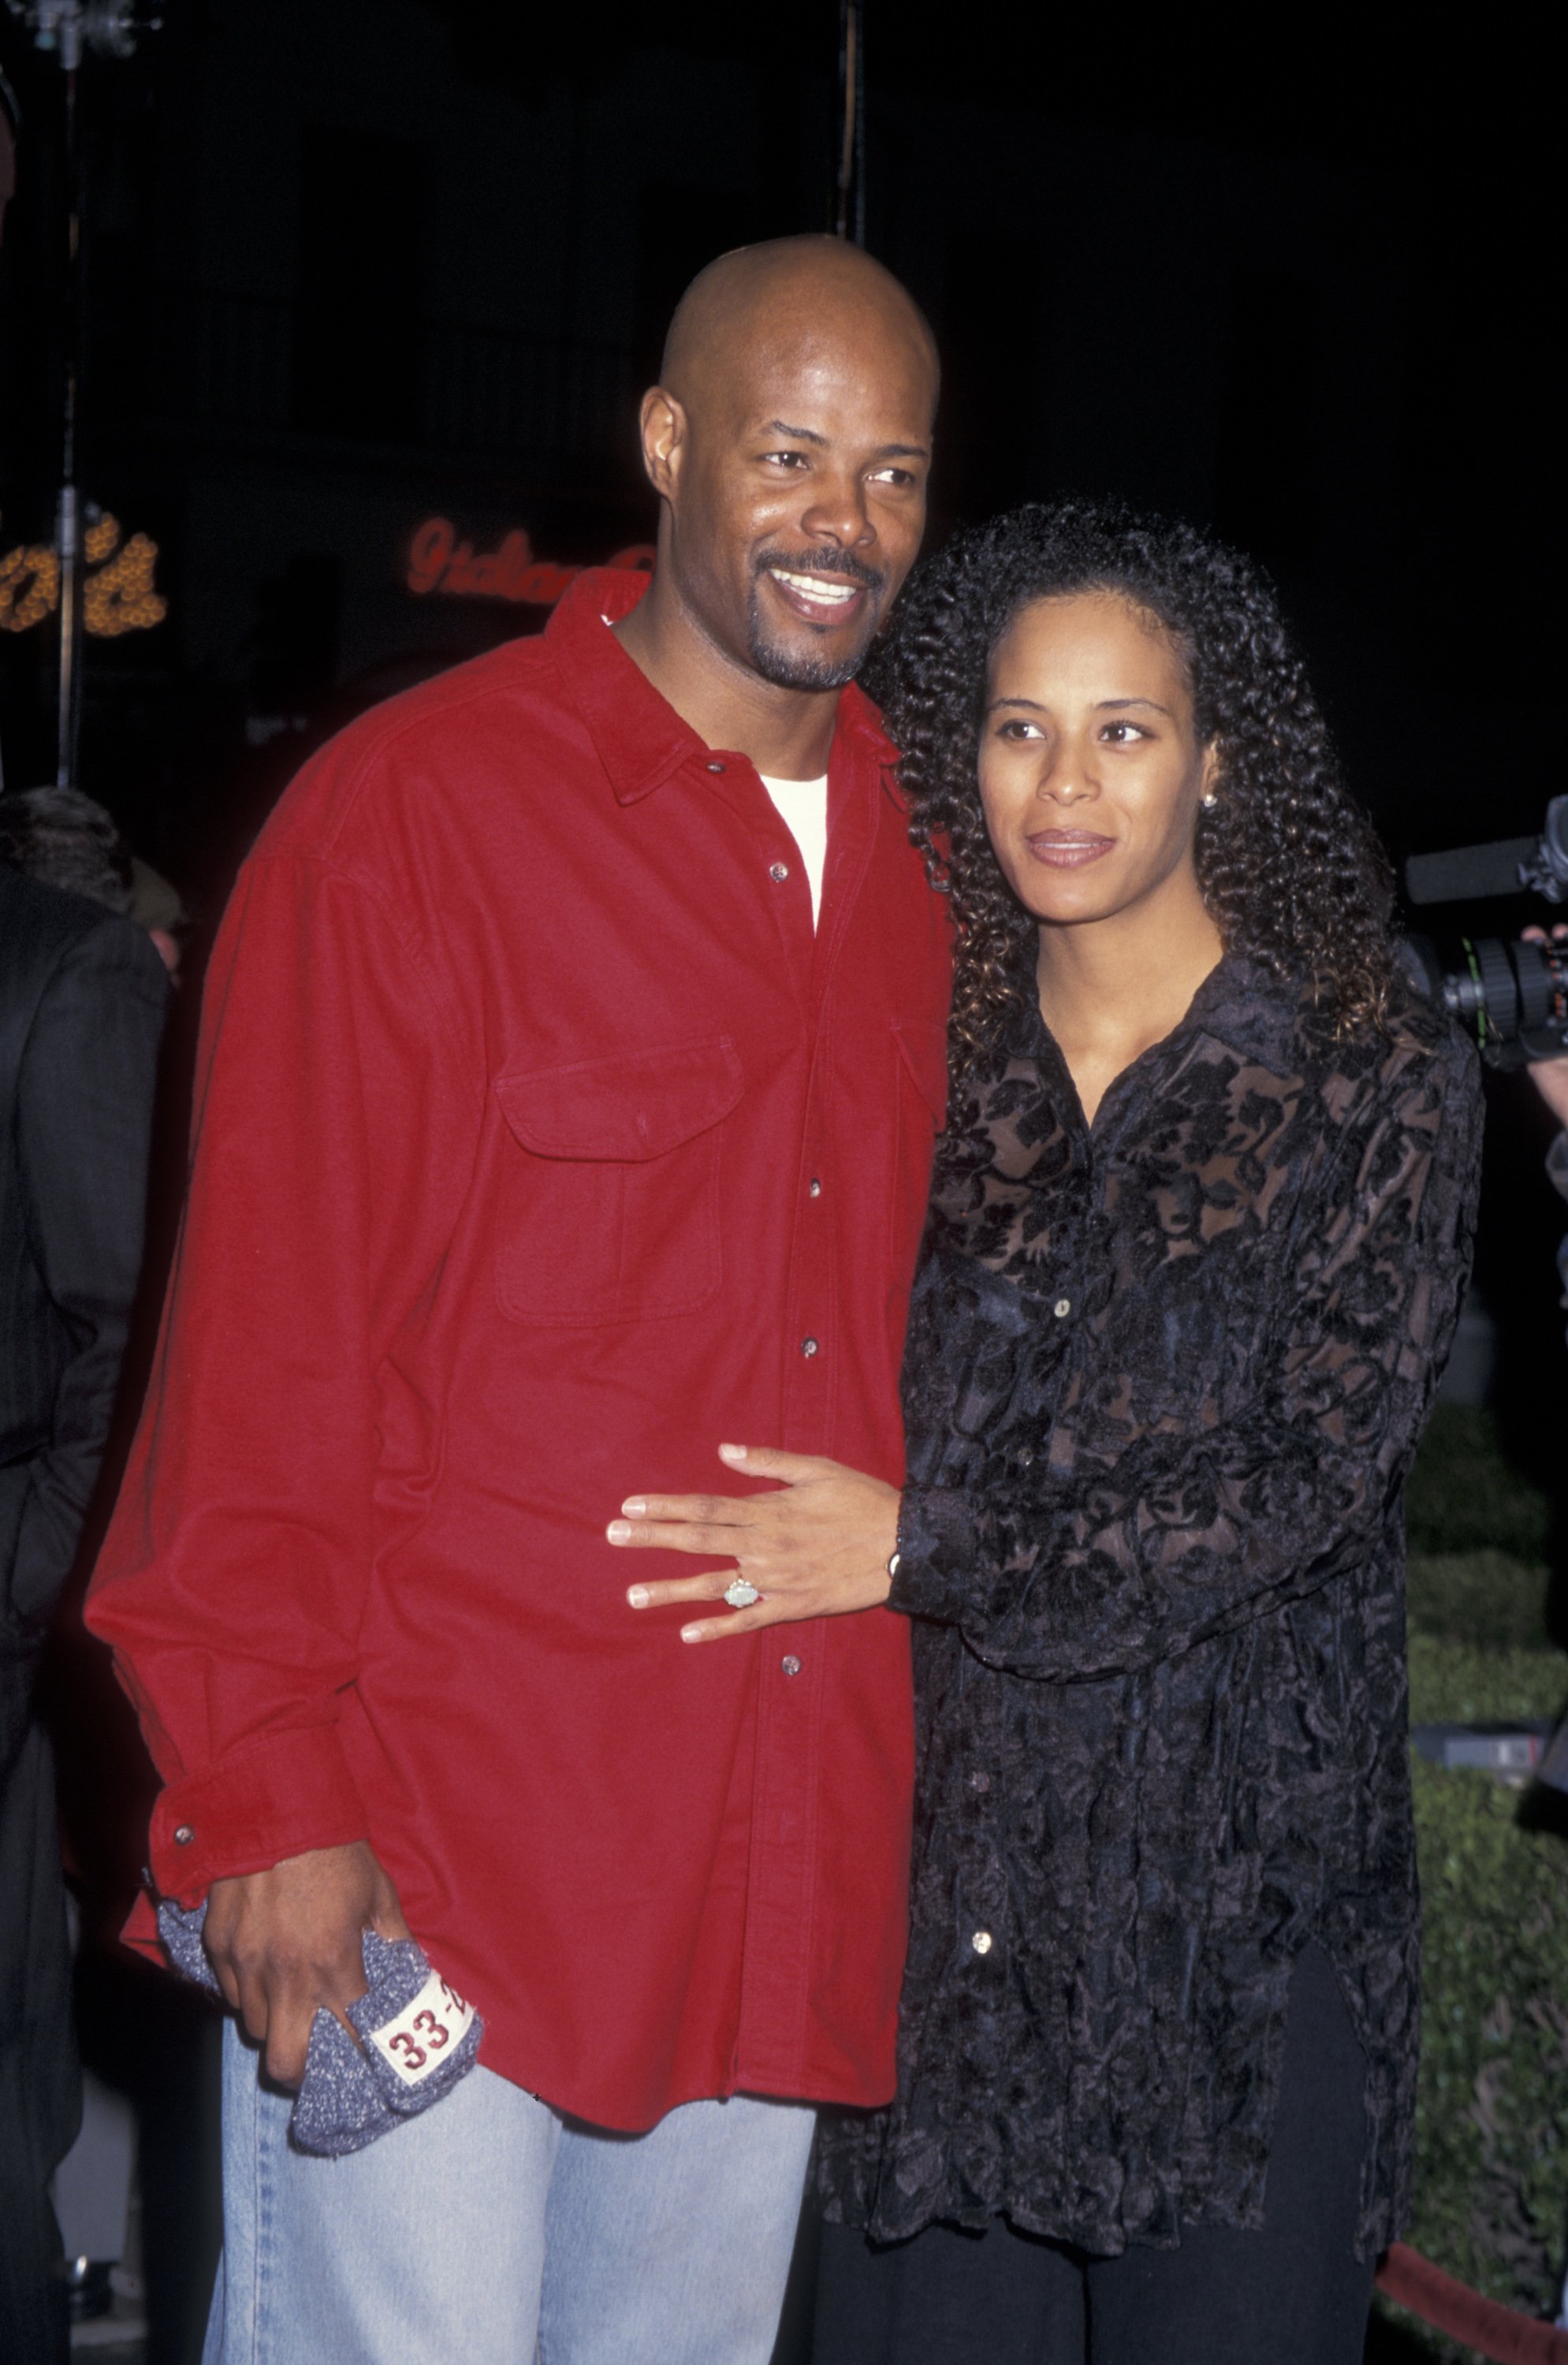 Keenen and Daphne Wayans attending an event together | Source: Getty Images